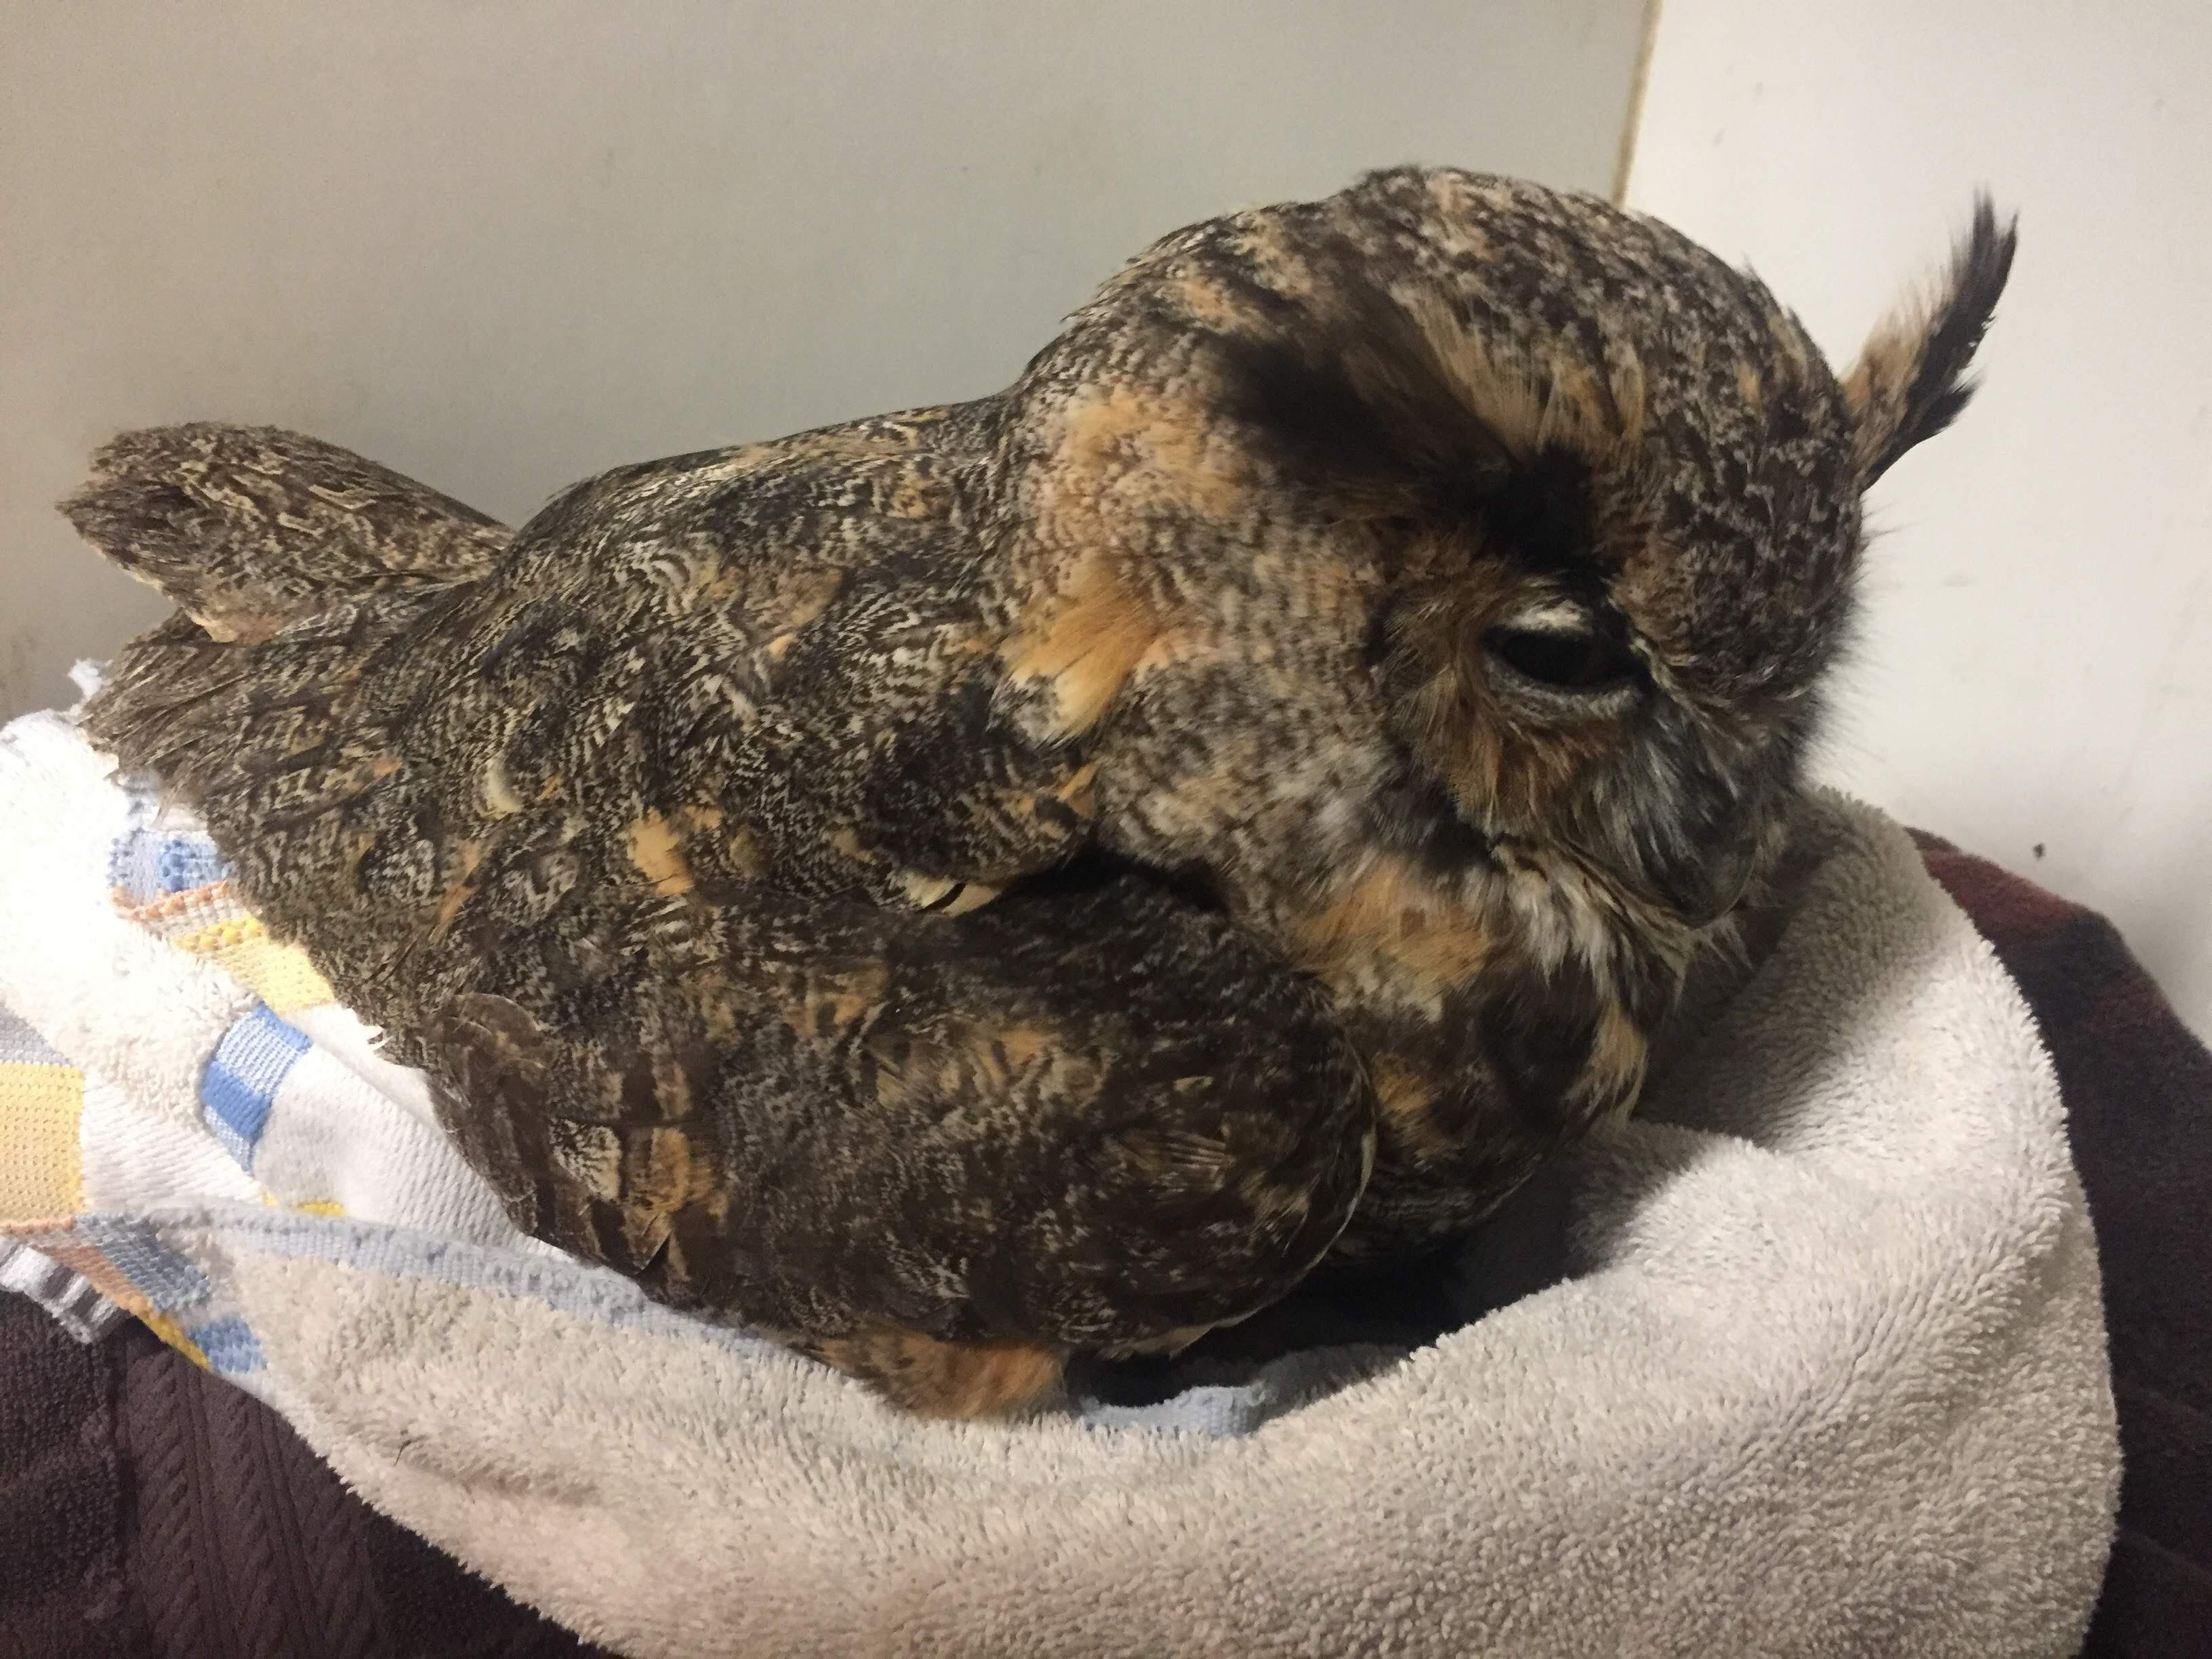 A Great Horned Owl sits in a nest-shaped towel in rehab. Its feathers are light brown and black, and its "horned" tufts are sticking out. Its eyes are partially open.